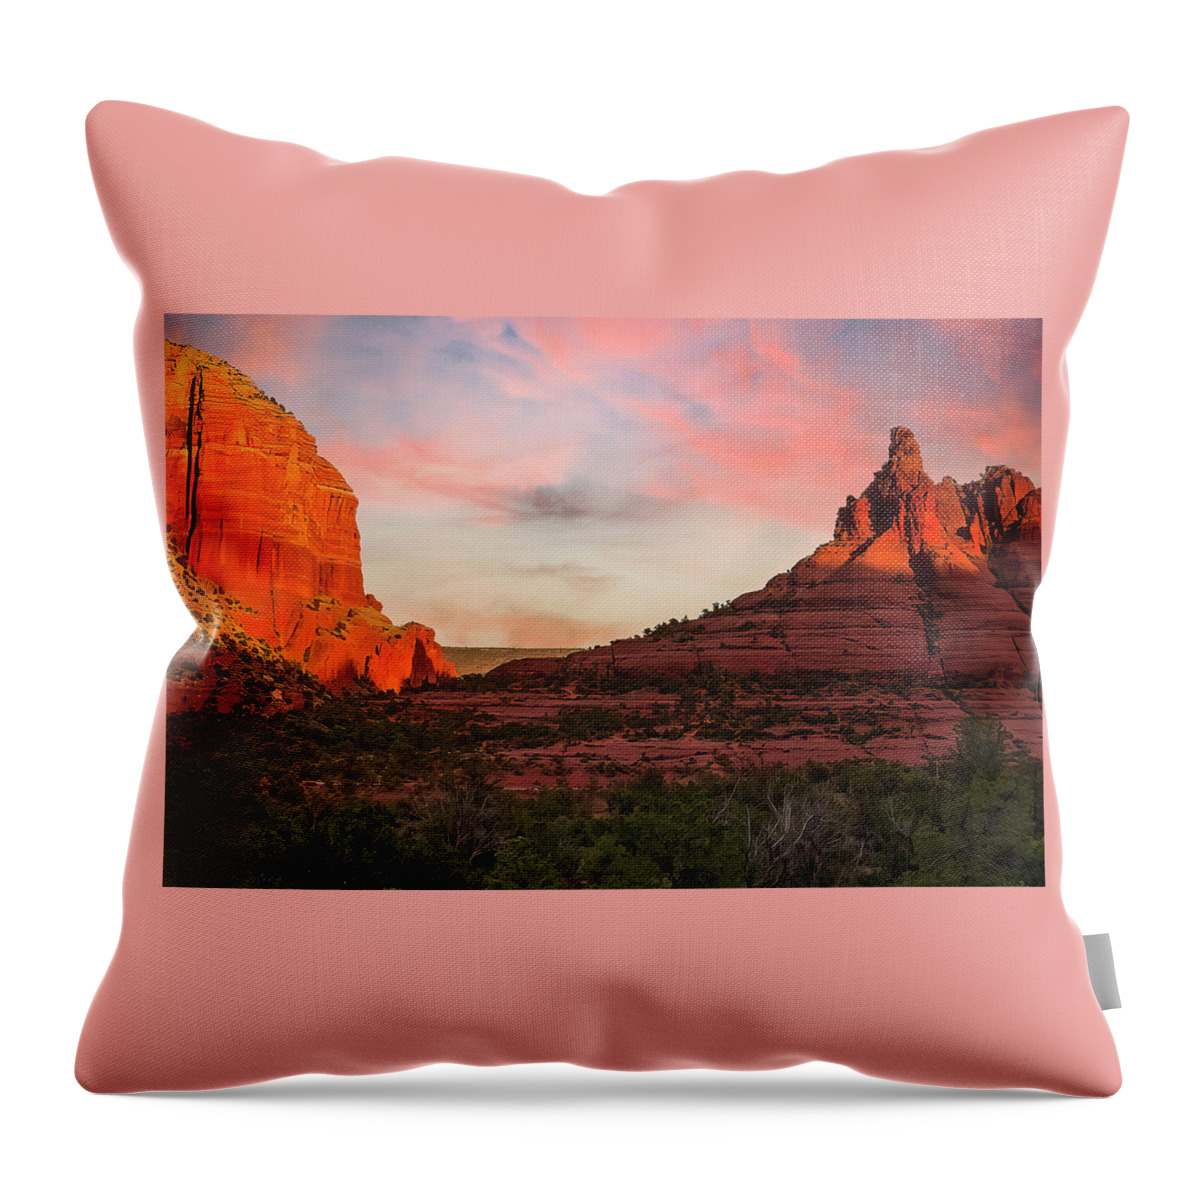  Throw Pillow featuring the photograph Climbing Bell Rock by Al Judge